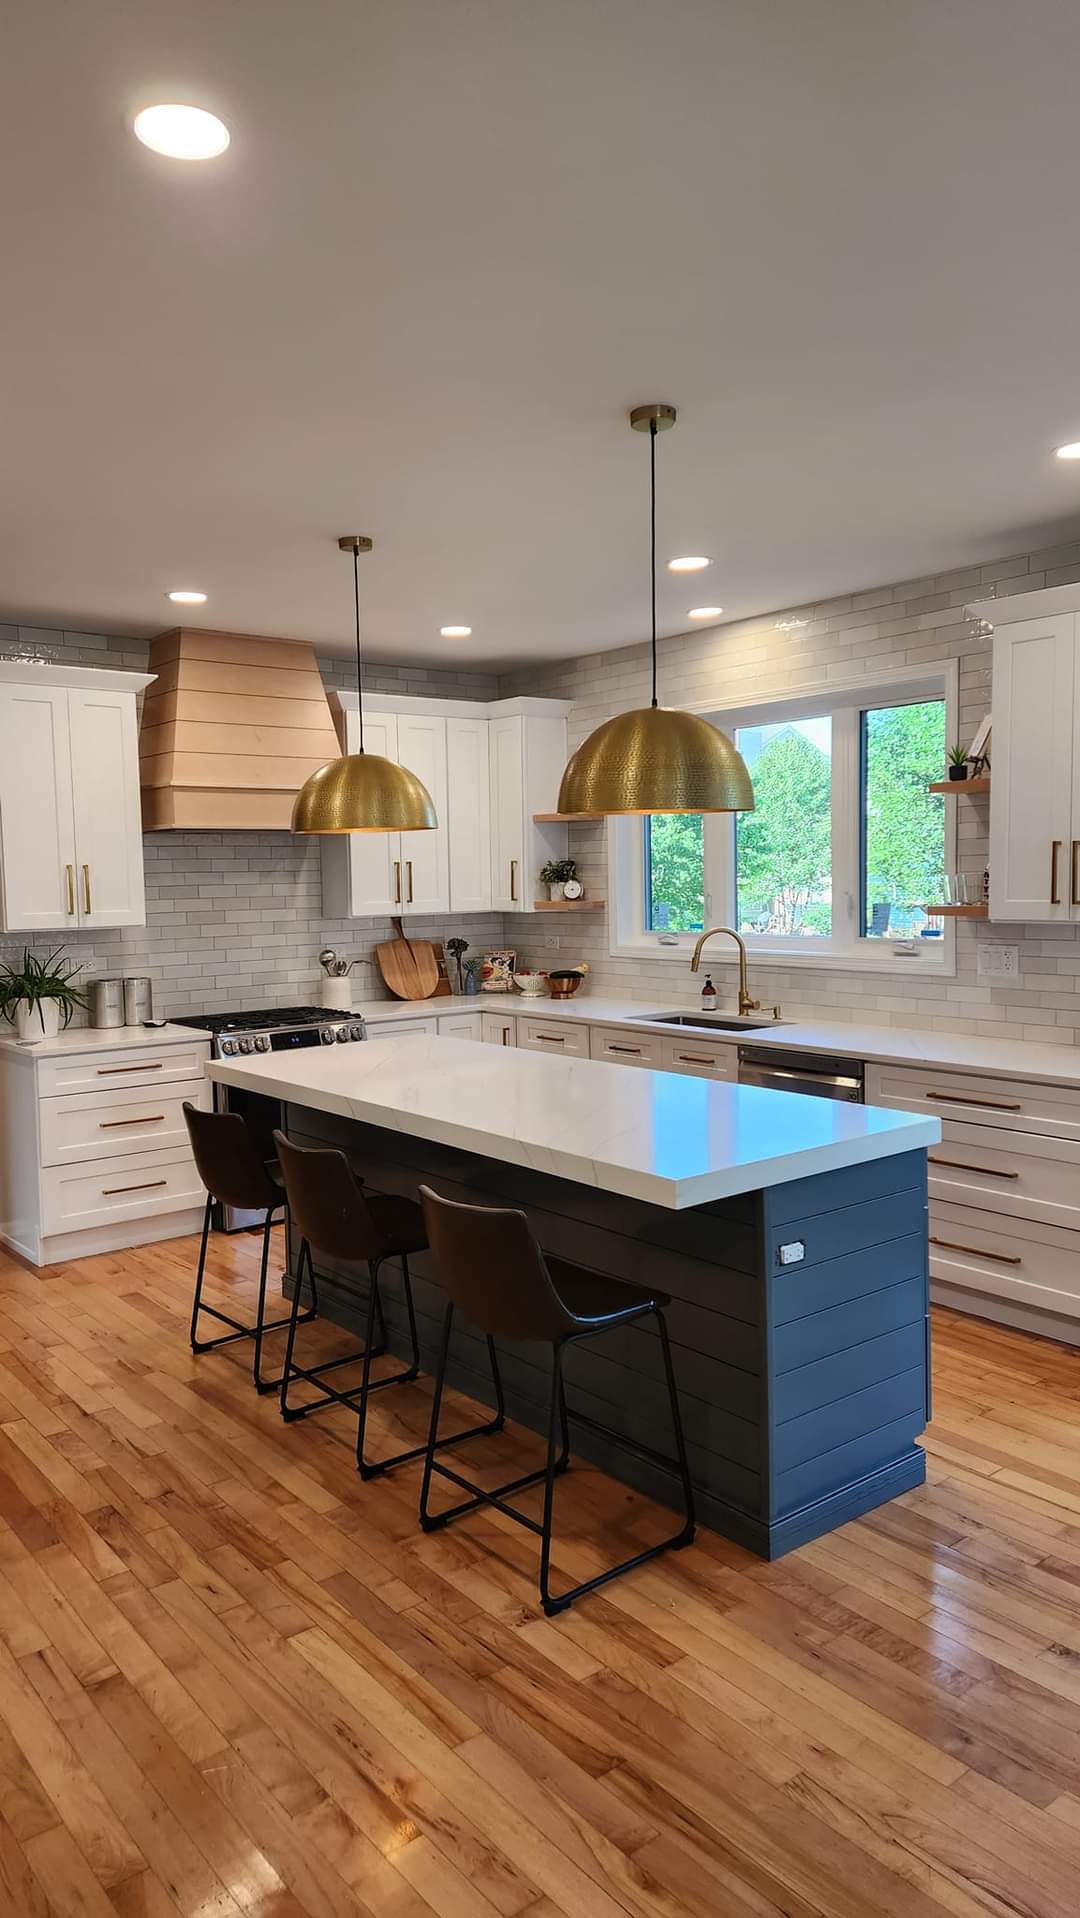 Transform Your Kitchen into a Stunning Oasis: Find the Best Kitchen Remodeler Near You